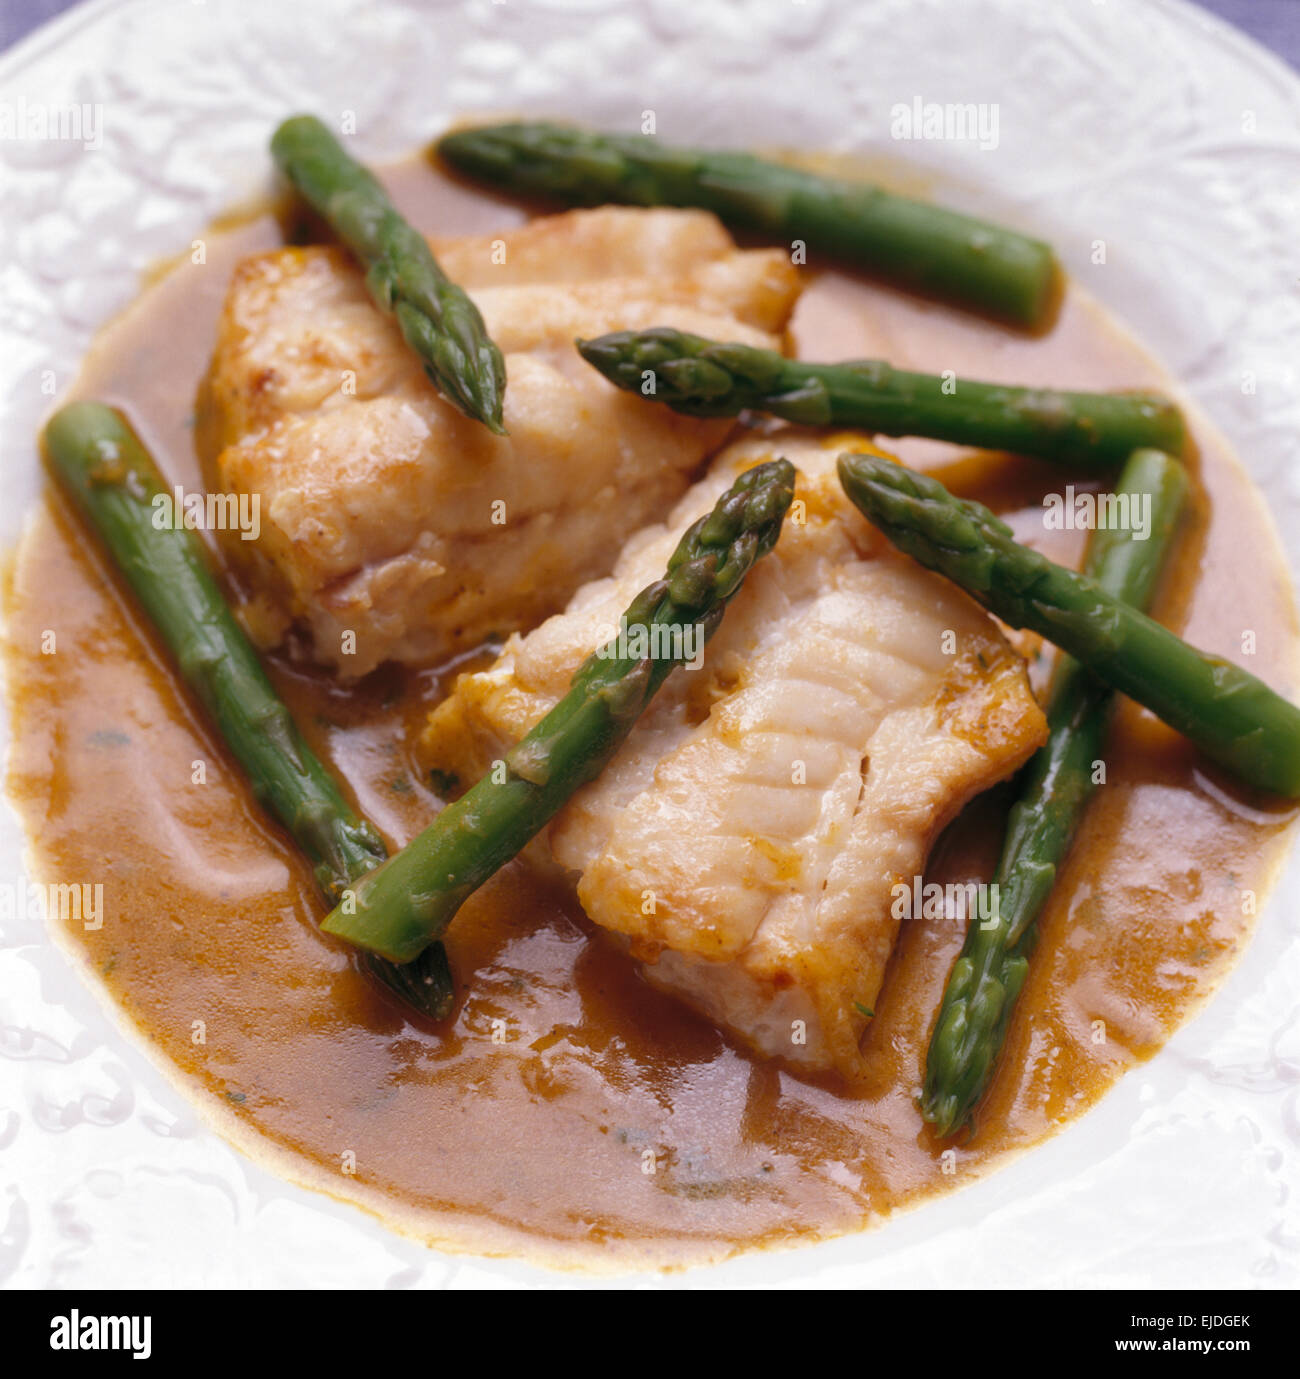 Close-up of roasted cod in a piquant sauce with asparagus Stock Photo